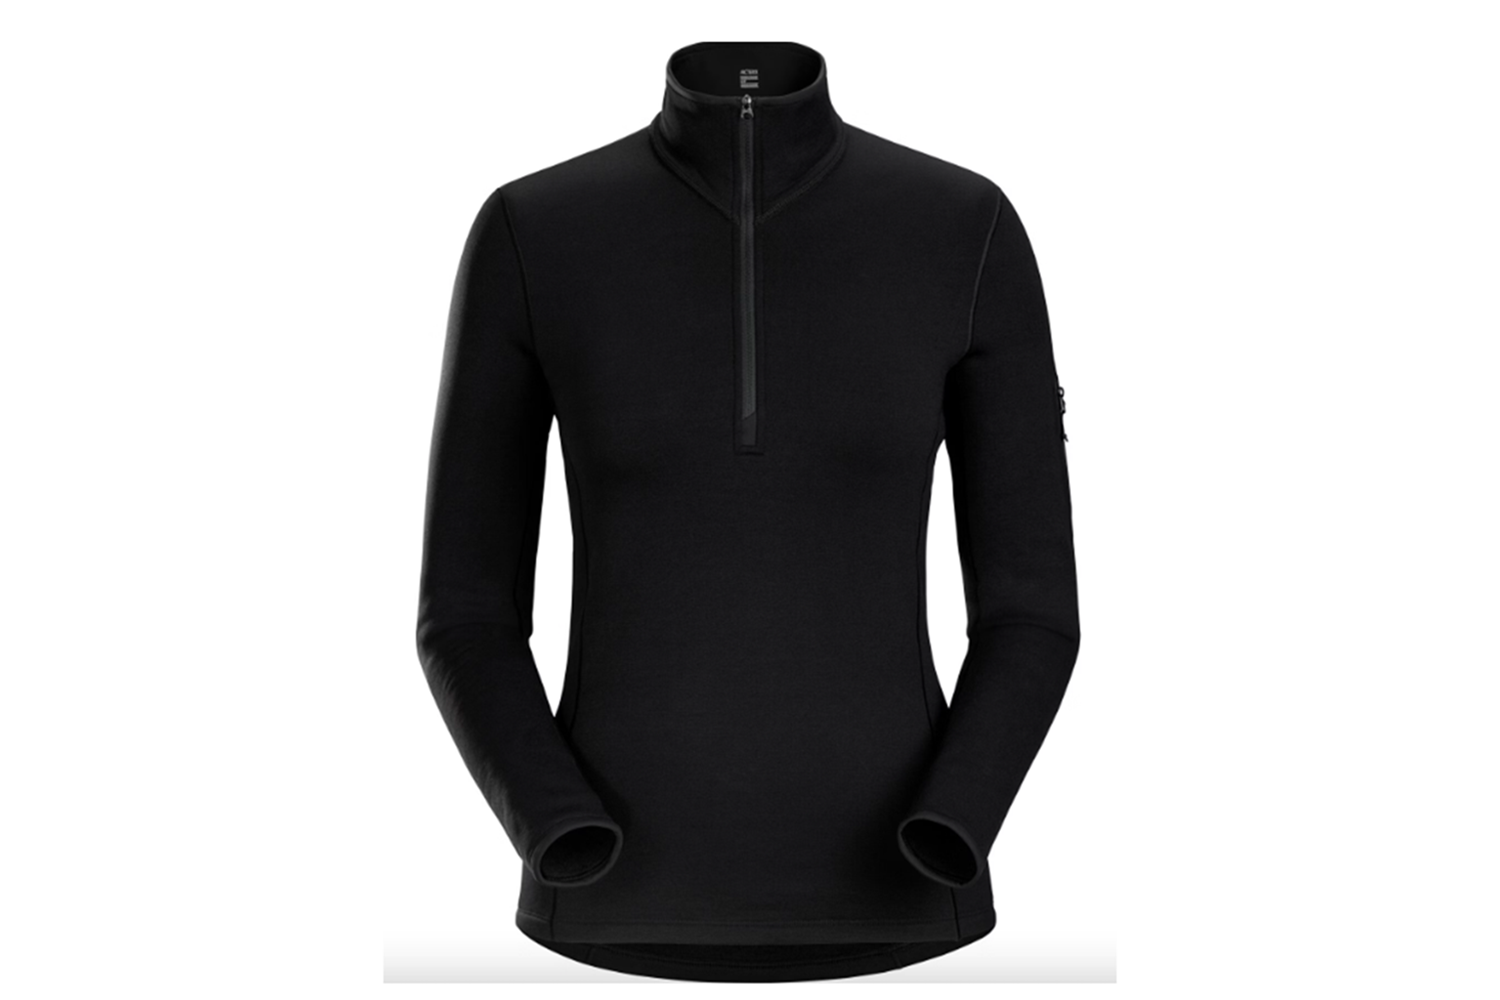 Best base layers for skiing